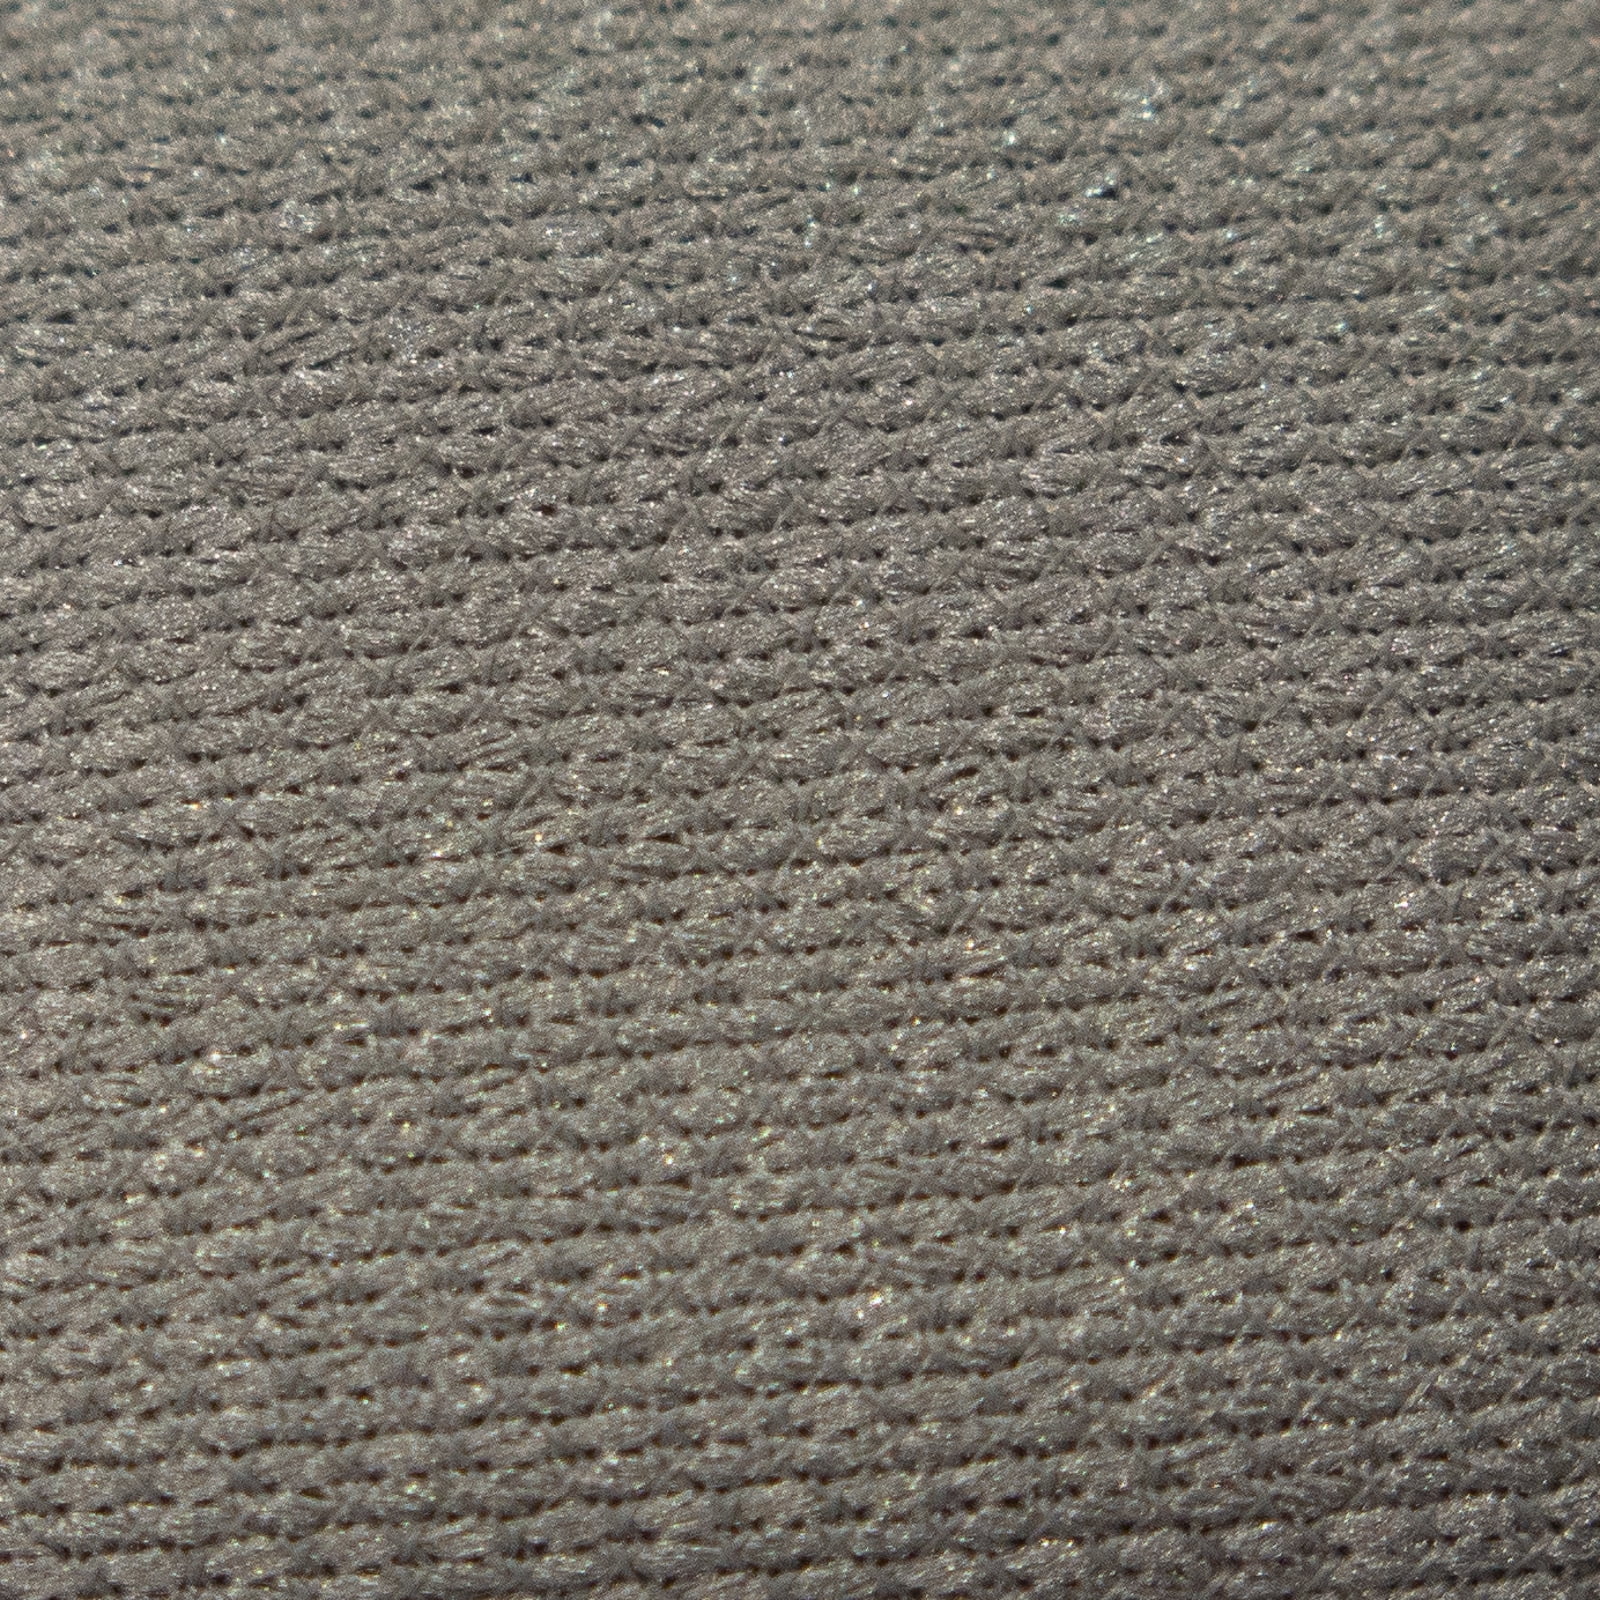 Light Gray, 150 inches Long x 60 inches Wide Automotive Headliner 3/16 Foam Backed Fabric Material 60 Wide 